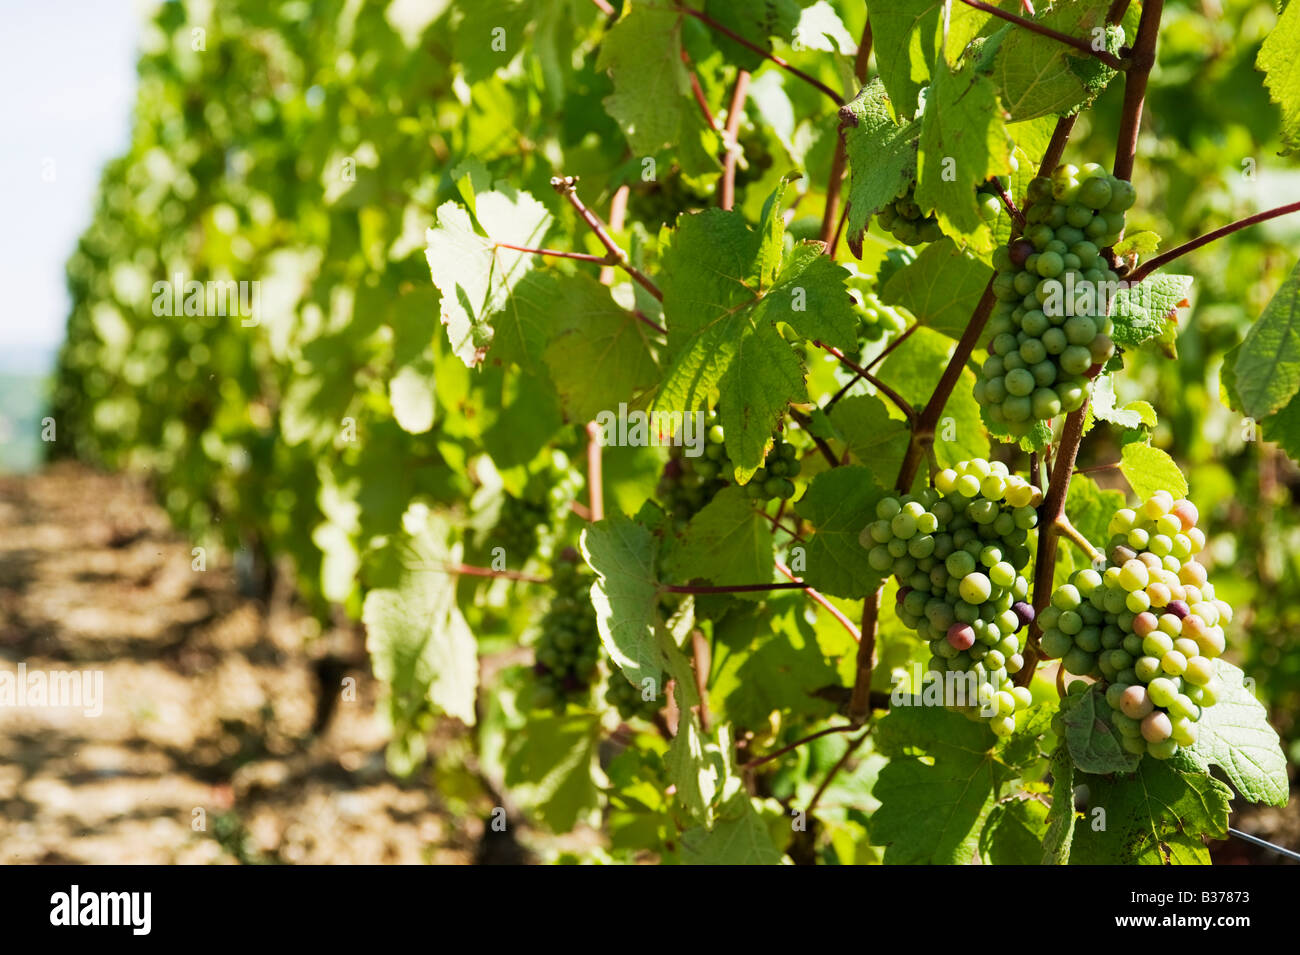 pinot noir grapes ripening in august chavot france Stock Photo